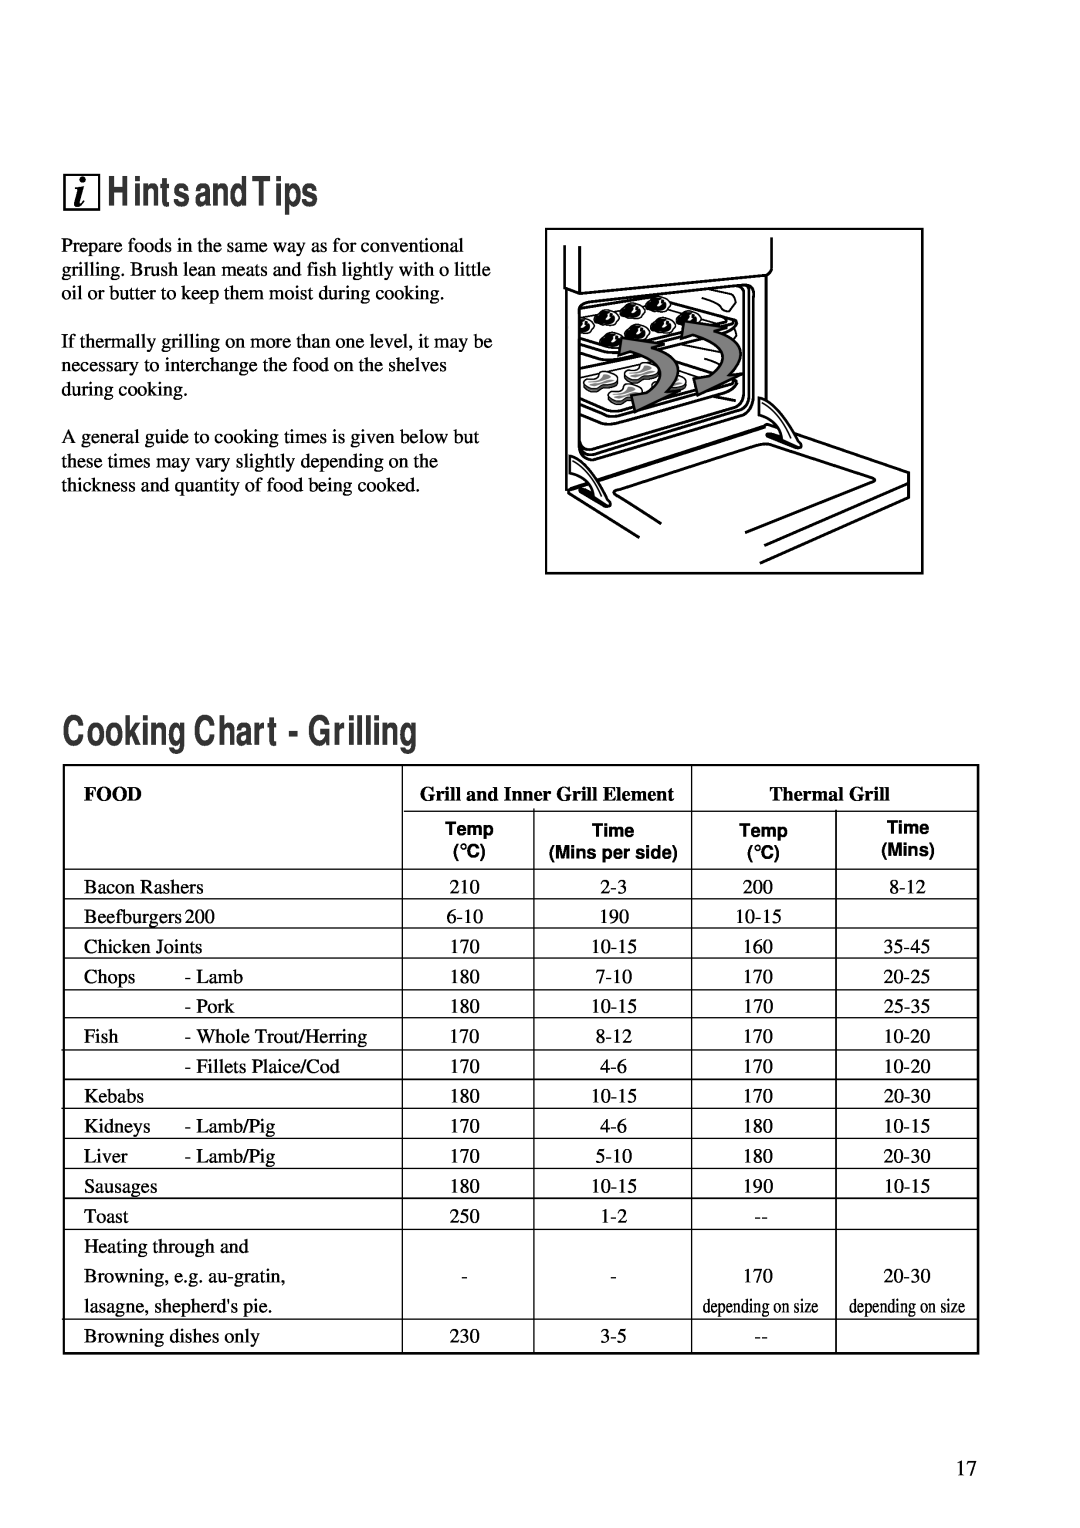 Zanussi ZBC 748 Cooking Chart - Grilling, Hints andTips, Food, Grill and Inner Grill Element, Thermal Grill 